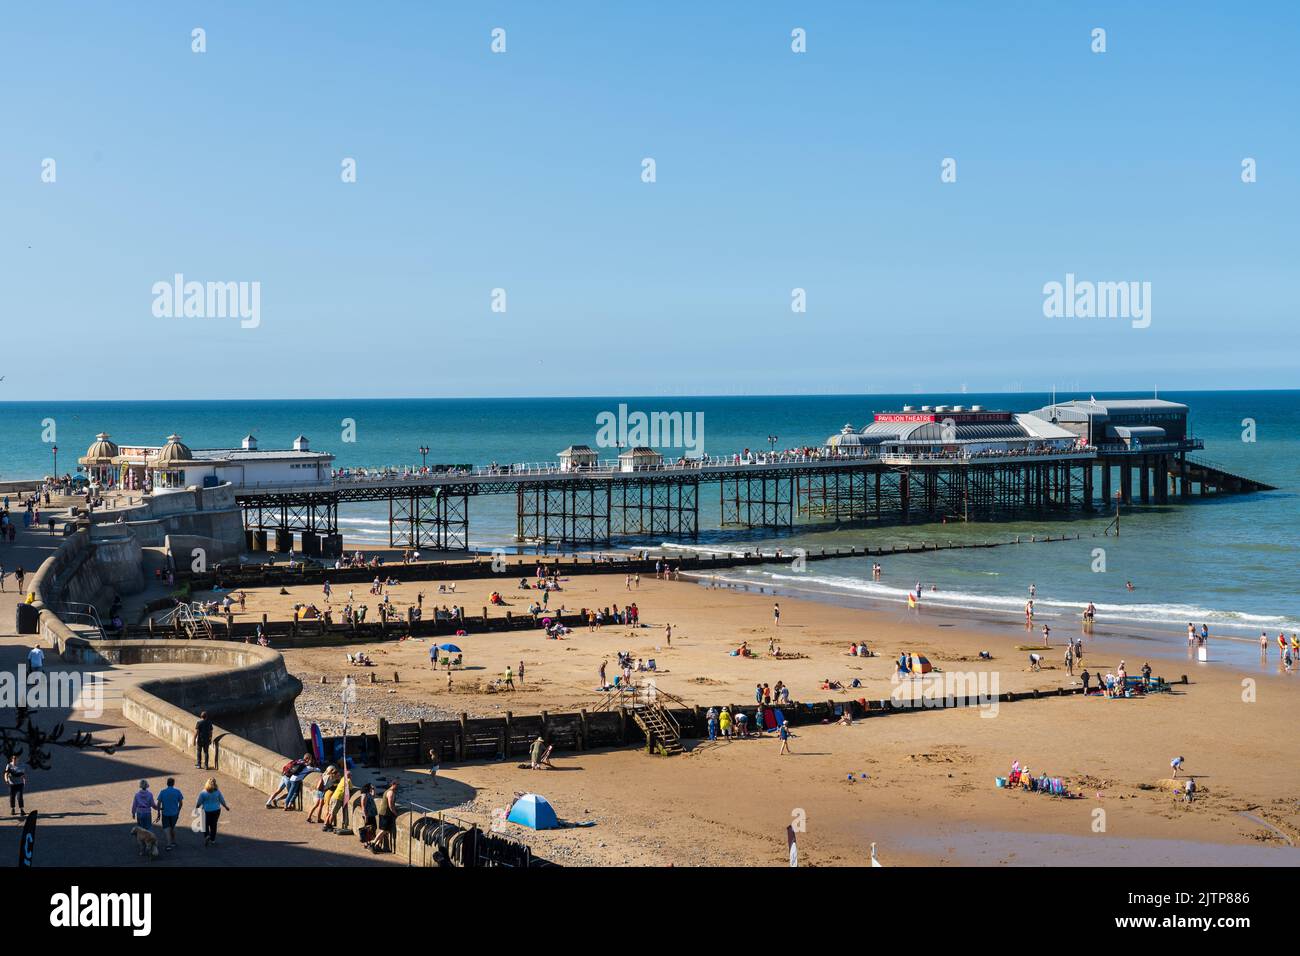 Cromer Pier in North Nofolk, UK on a blue sky summer day Stock Photo